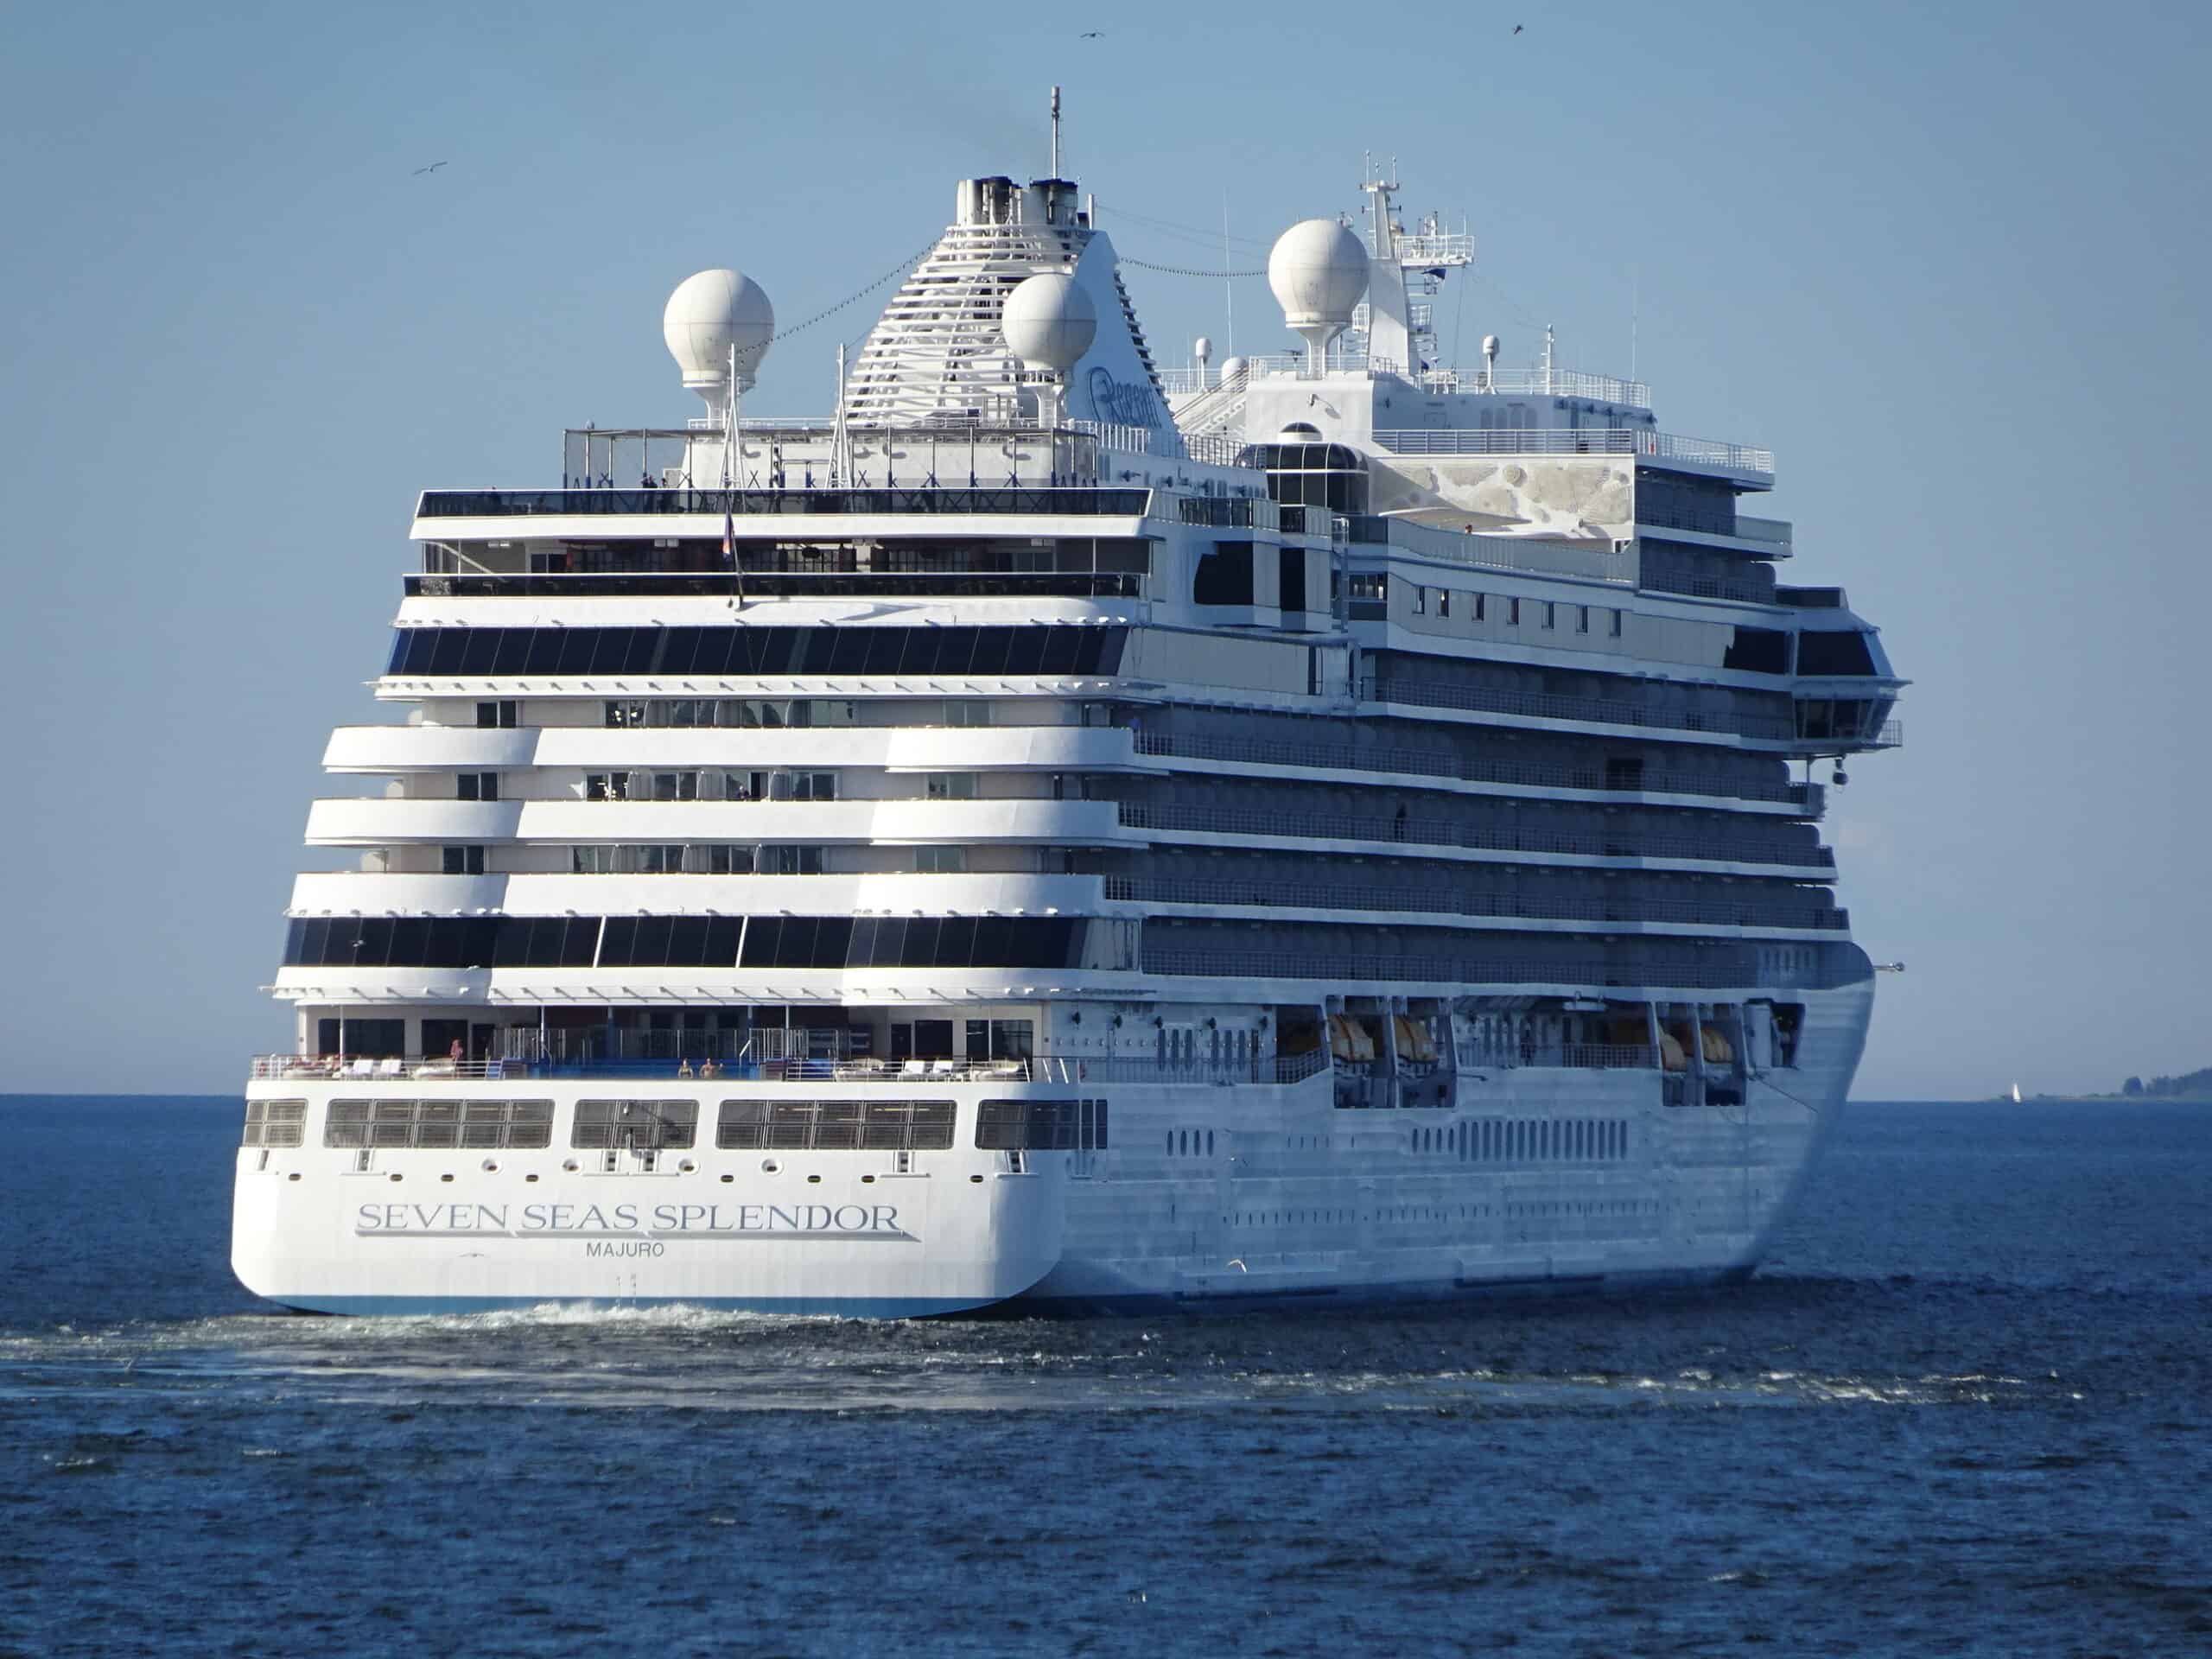 <p>While the Regent World Cruise won't arrive until 2027, passage on this trip is already in heavy demand. The price of this demand is upward of $1 million, making it the most expensive cruise vacation ever. Passengers who want to stay in the Regent Suite will start with a $839,999 price tag per guest. The room also includes a $200,000 mattress, original Picasso artwork, and a Steinway grand piano.</p> <p>For this price, you'll receive a dedicated butler, a full bar, and a personal car and driver in every port. In total, you'll be able to do 486 planned shore excursions across 71 ports of call in 40 countries and 6 continents. This accounts for more than 35,668 nautical miles of travel over 3 oceans. At least you'll get unlimited Wi-Fi as well.</p> <div class='fwpPitch'><div> <h2><b>Sponsored: Find a Qualified Financial Advisor</b></h2> <p>Finding a qualified financial advisor doesn’t have to be hard. <a href="http://https://smartasset.com/retirement/find-a-financial-planner?utm_source=247wallst&utm_campaign=wall_qualified&utm_content=desktop|the-14-most-wildly-expensive-cruises-on-earth|1385159&utm_term=Microsoft&utm_medium=eoaCTALinkDefault" rel="noopener nofollow sponsored">SmartAsset’s free tool matches you with up to 3 fiduciary financial advisors in your area in 5 minutes.</a> Each advisor has been vetted by SmartAsset and is held to a fiduciary standard to act in your best interests. If you’re ready to be matched with local advisors that can help you achieve your financial goals, <a href="https://smartasset.com/retirement/find-a-financial-planner?utm_source=247wallst&utm_campaign=wall_qualified&utm_content=desktop|the-14-most-wildly-expensive-cruises-on-earth|1385159&utm_term=Microsoft&utm_medium=eoaCTALinkDefault" rel="noopener nofollow sponsored">get started now</a>.</p> </div>  </div><p>Agree with this? Hit the Thumbs Up button above. Disagree? Let us know in the comments with what you'd change.</p>